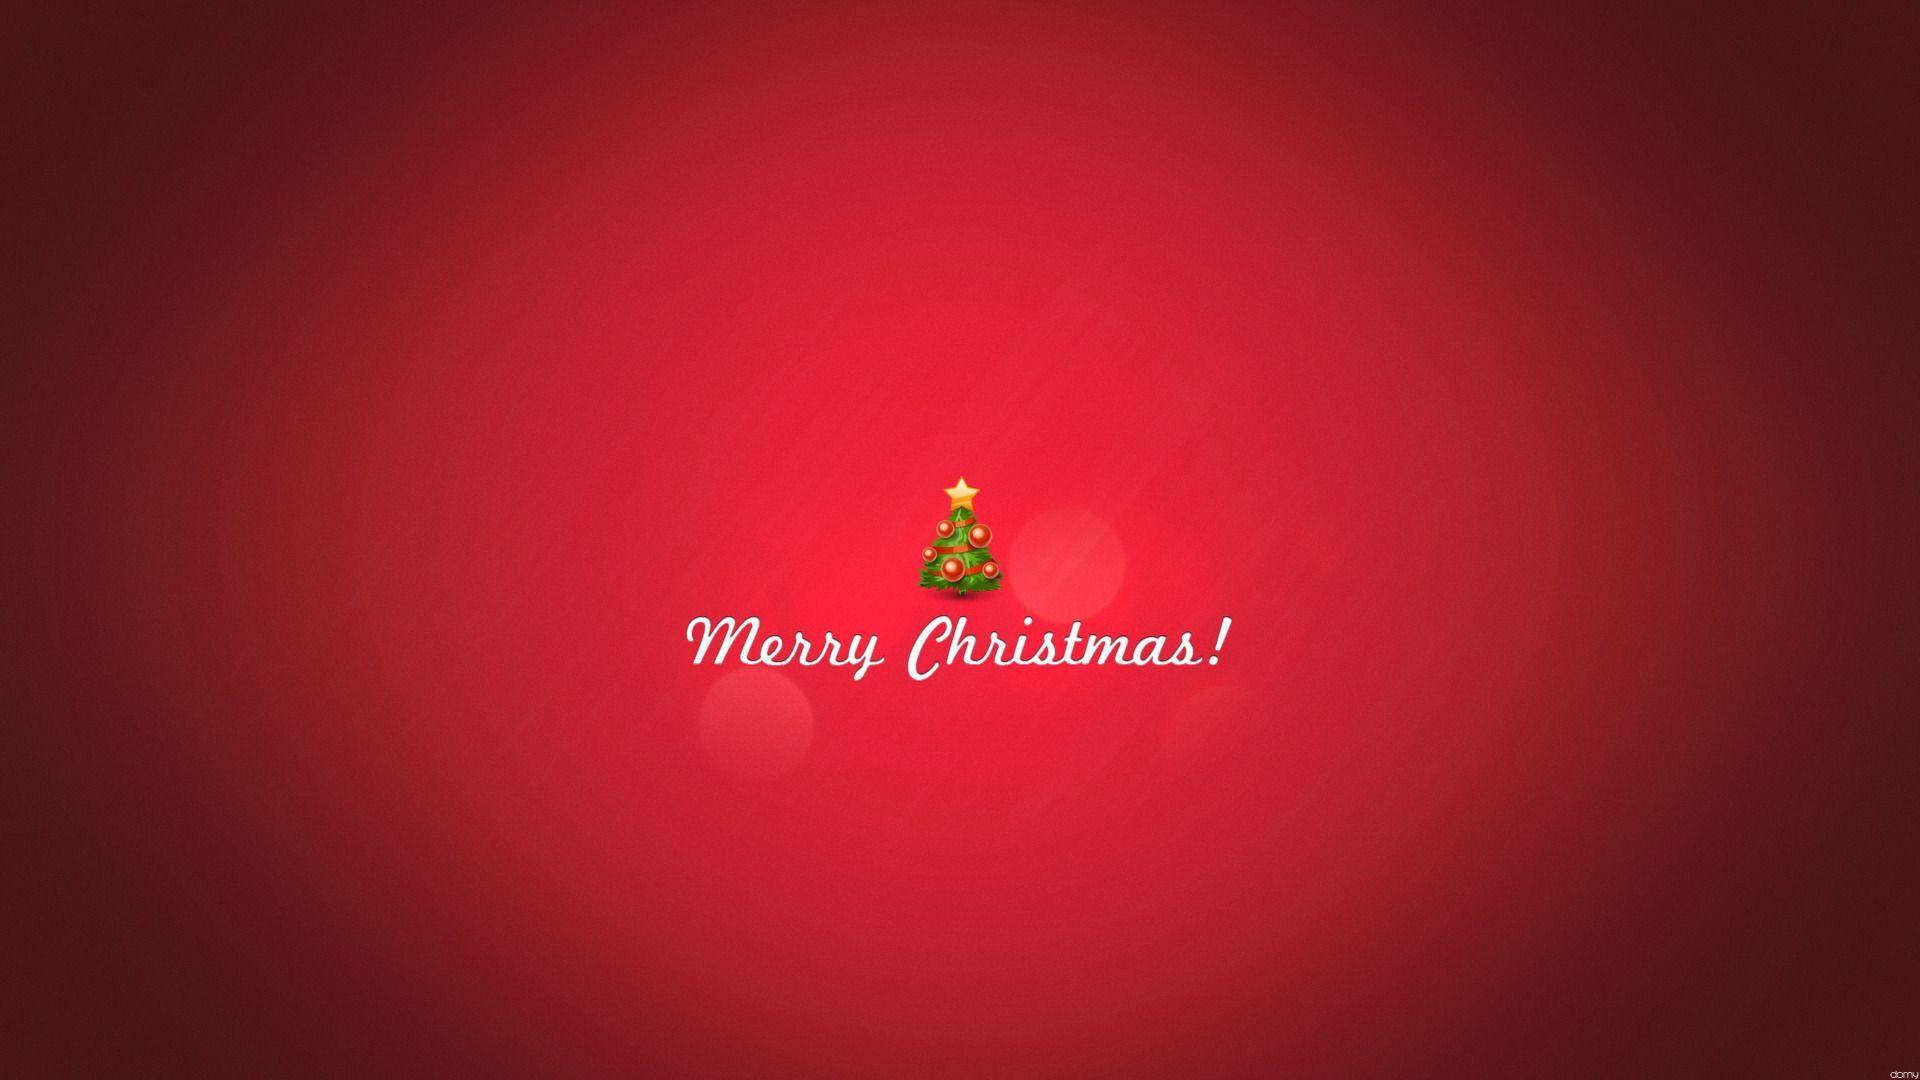 Minimalist Christmas Wallpaper for Desktop and iPhone